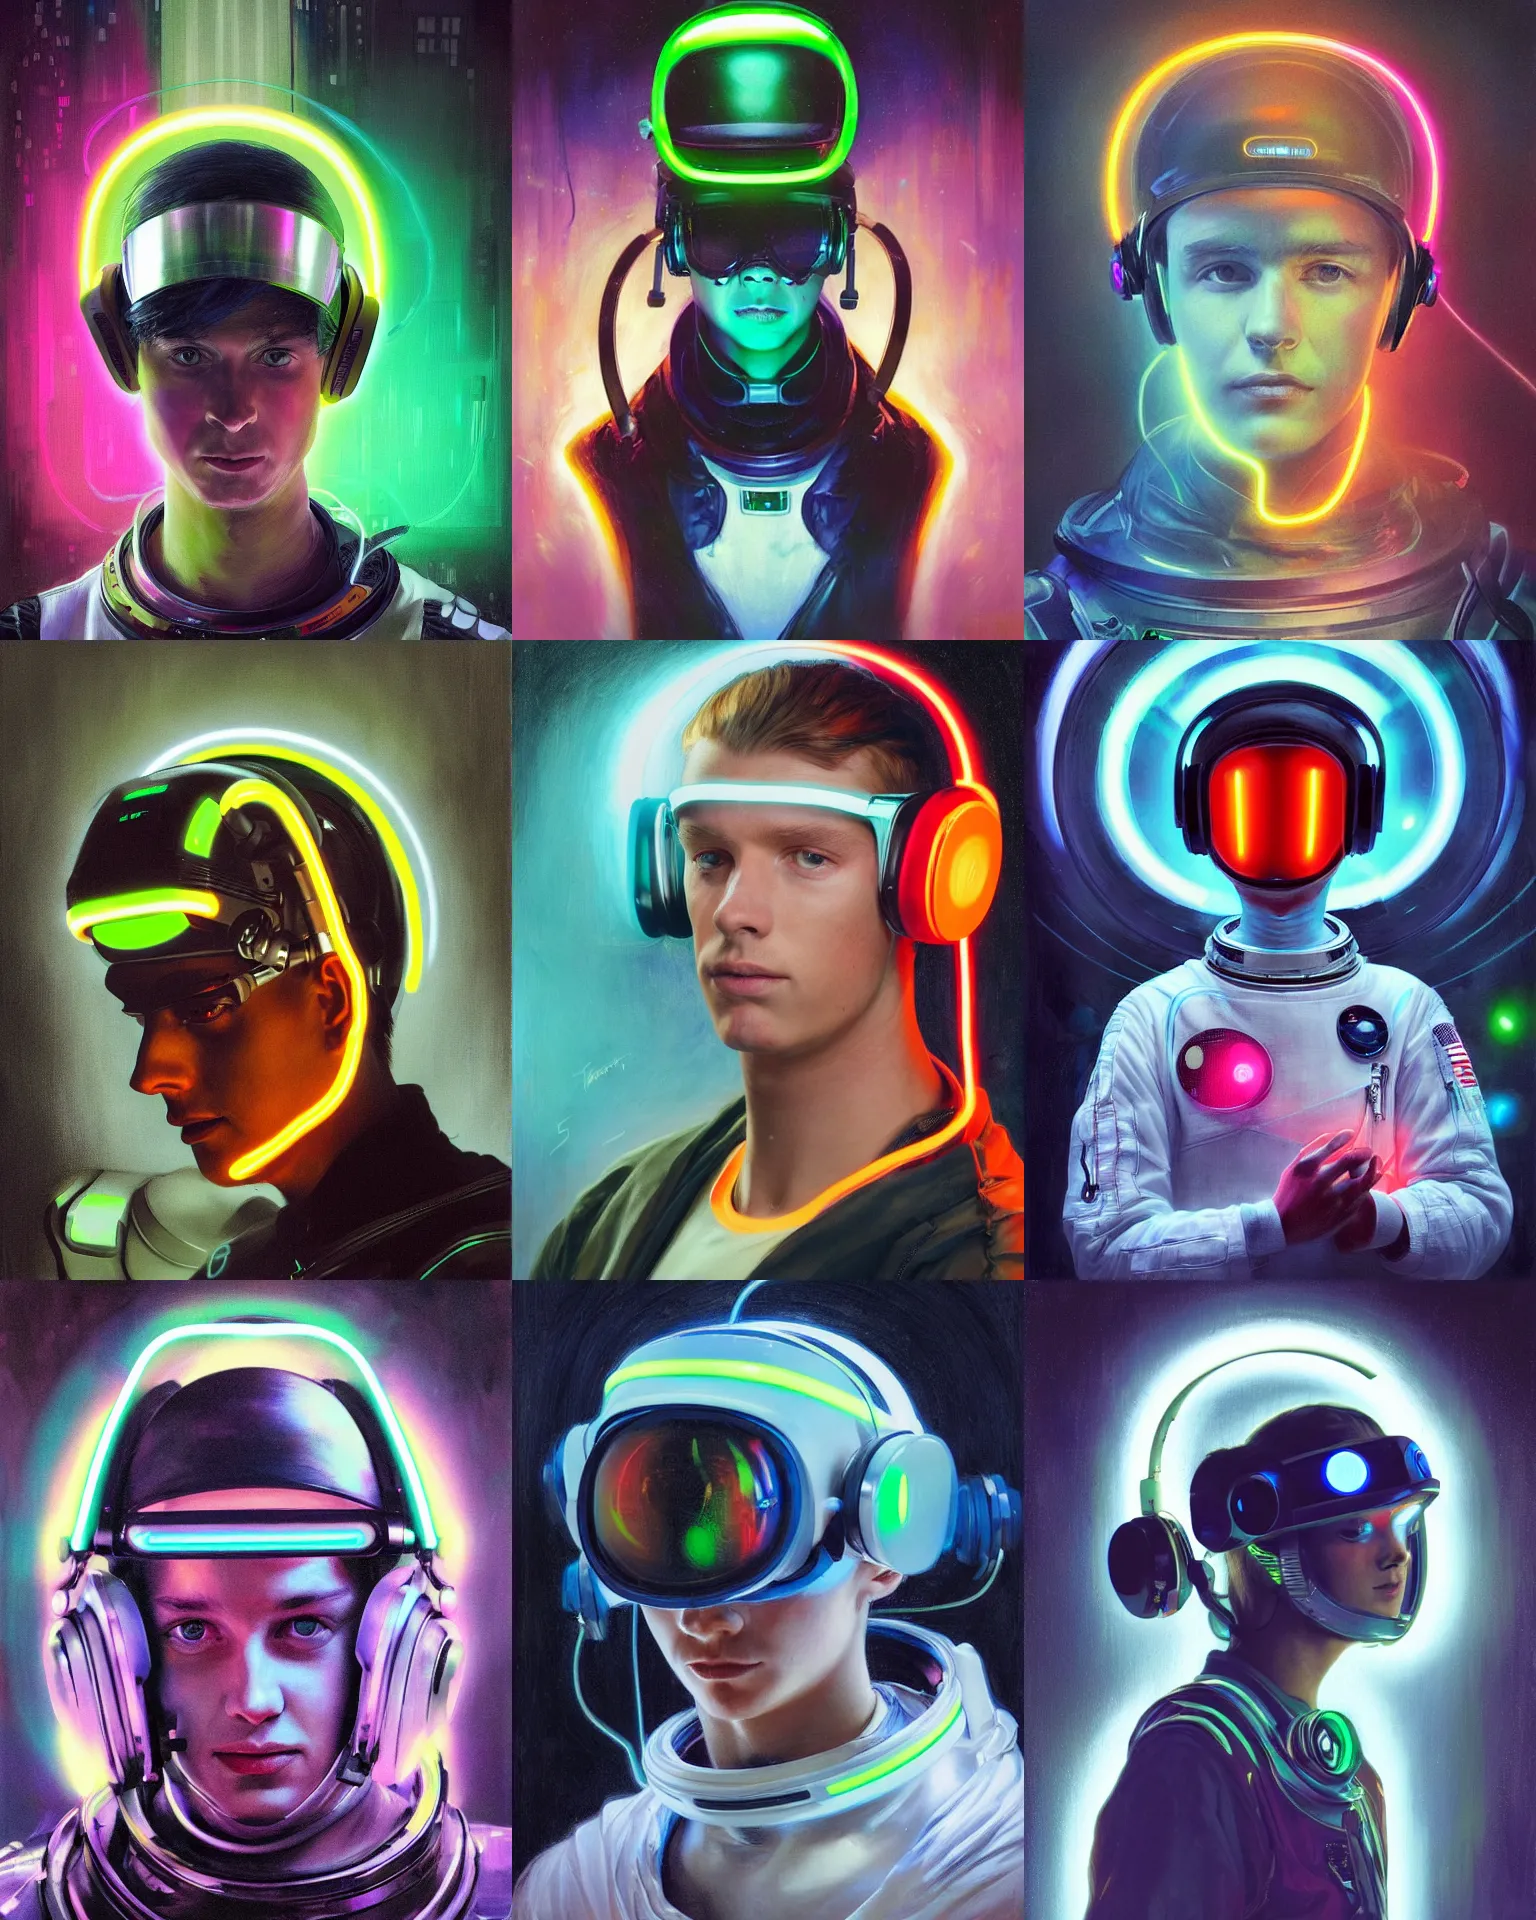 Prompt: future coder looking on, glowing visor over eyes and sleek neon headphones, neon accents, desaturated headshot portrait painting by dean cornwall, john singer sargent, ilya repin, leyendecker, alex grey, alex ross, astronaut cyberpunk electric fashion photography